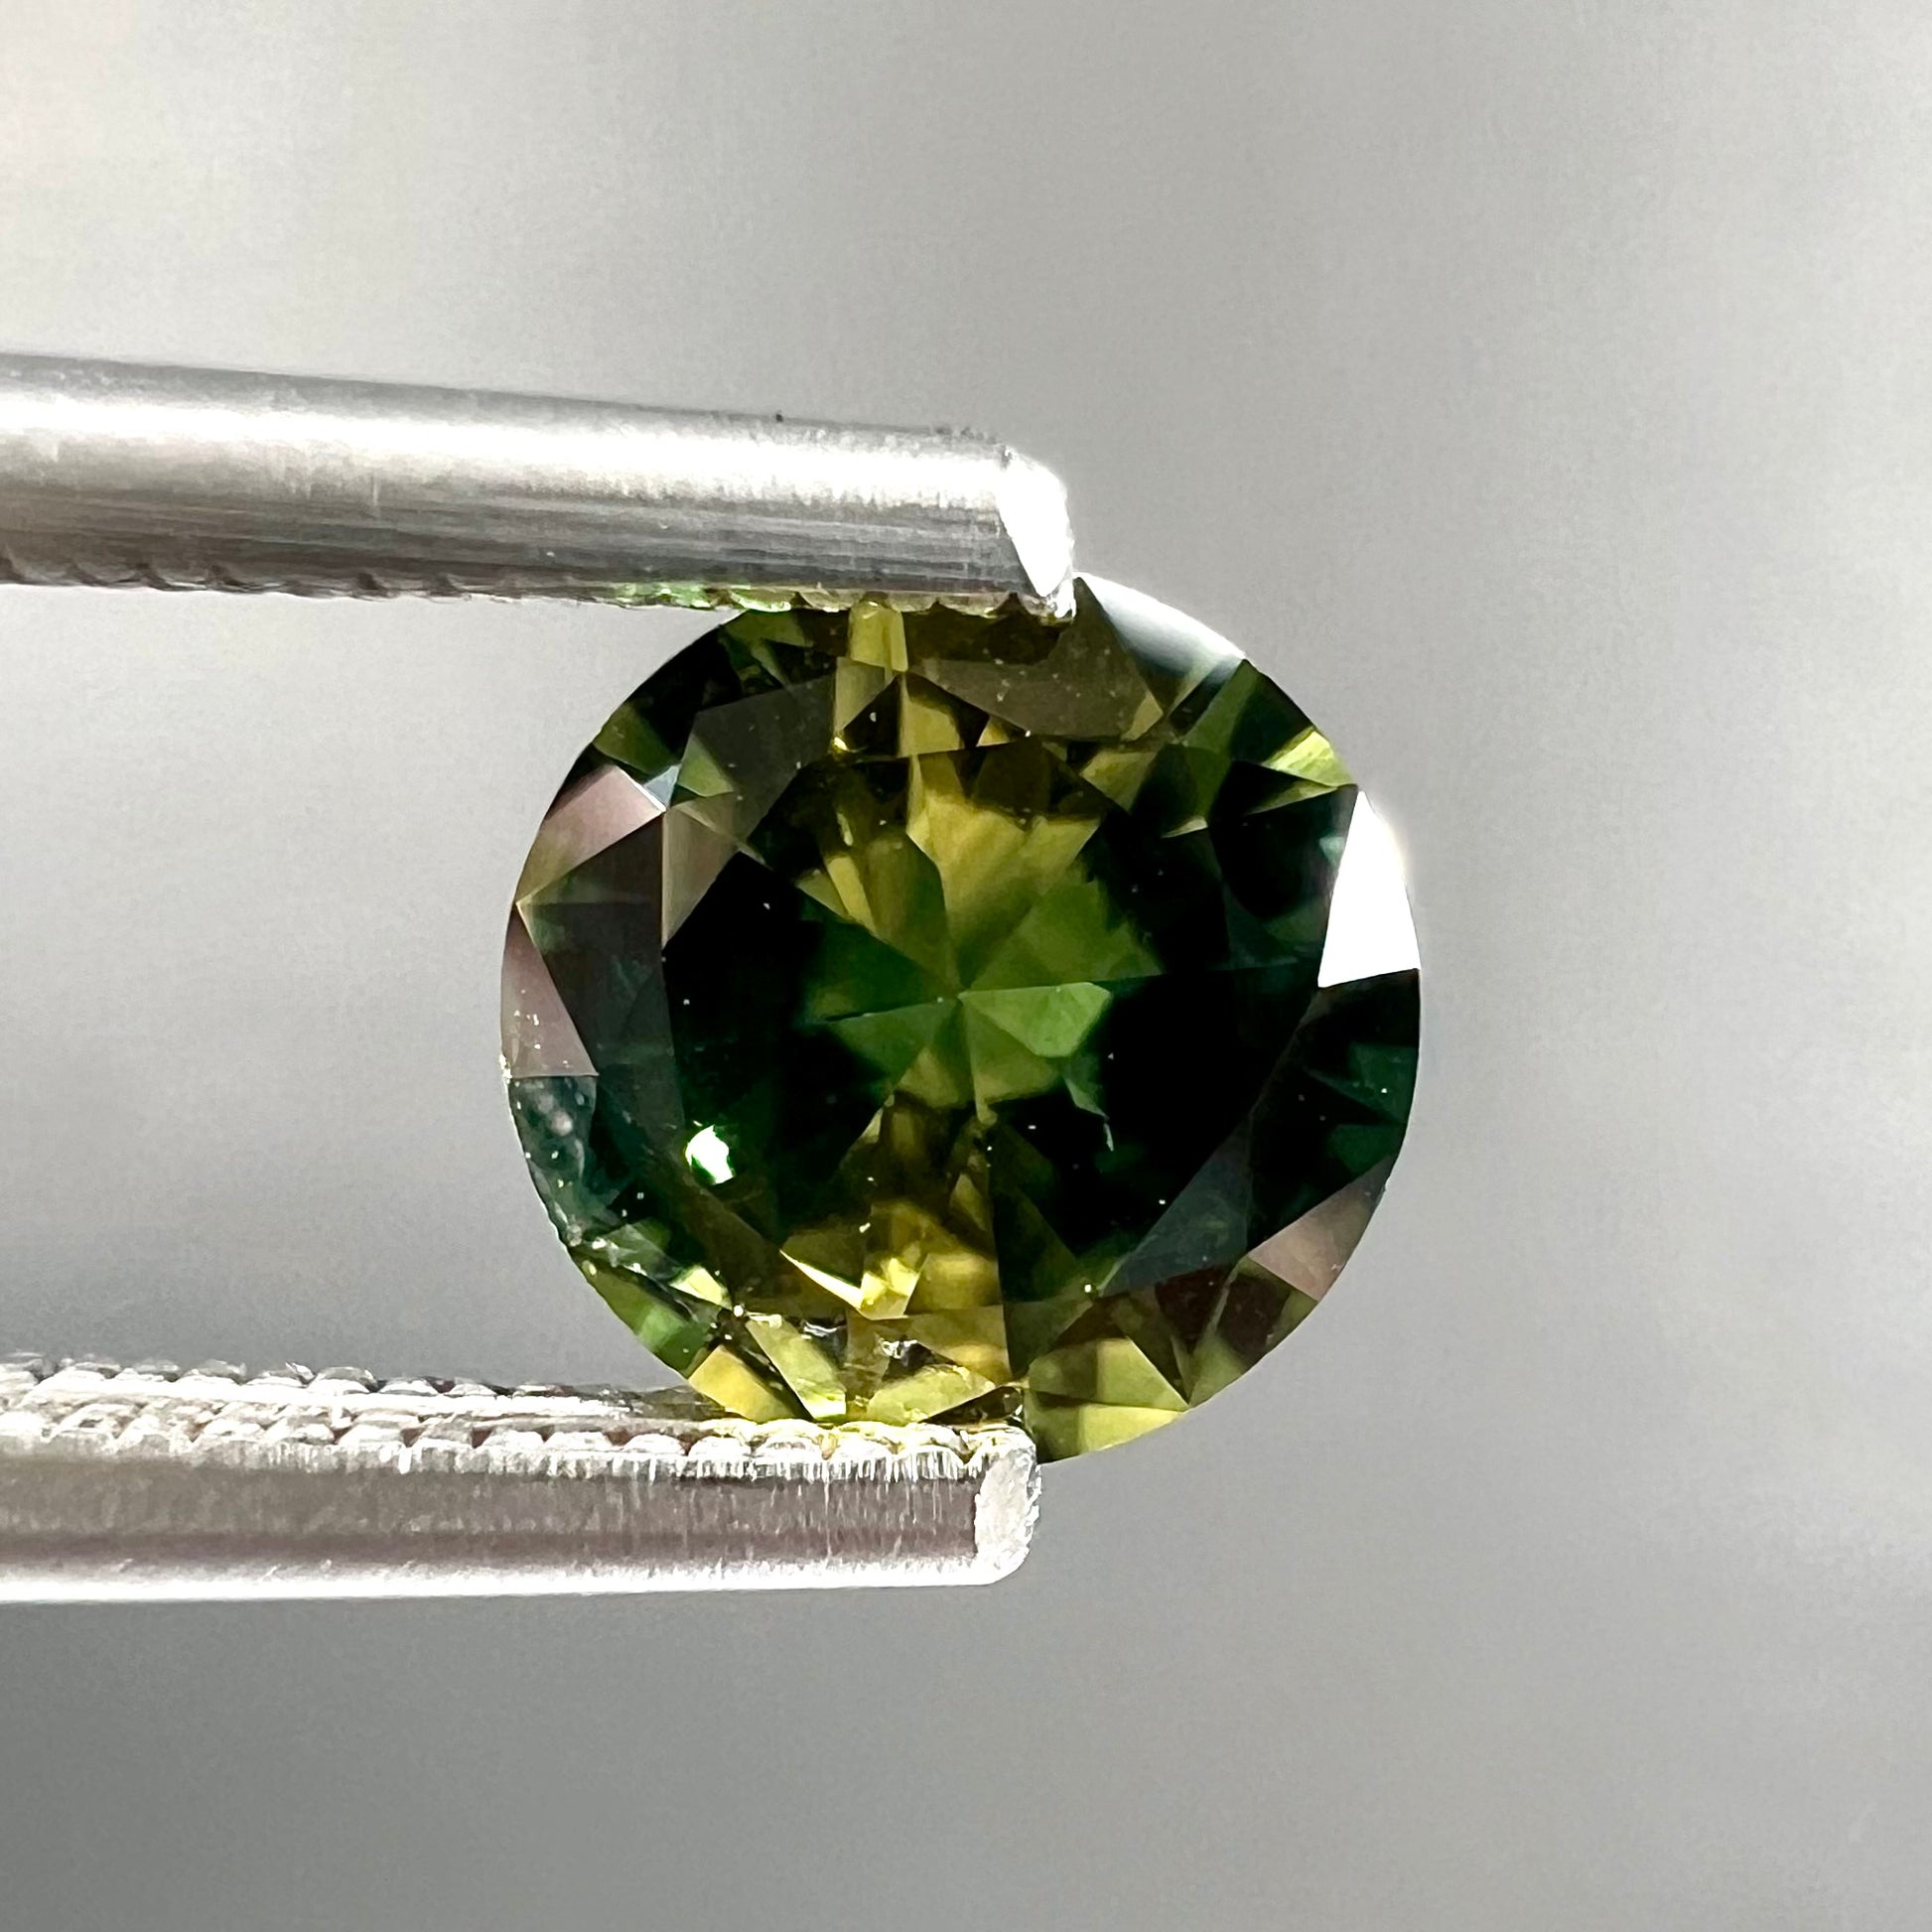 A loose, round brilliant cut Australian parti sapphire.  The stone shows colors of yellow, green, and blue.